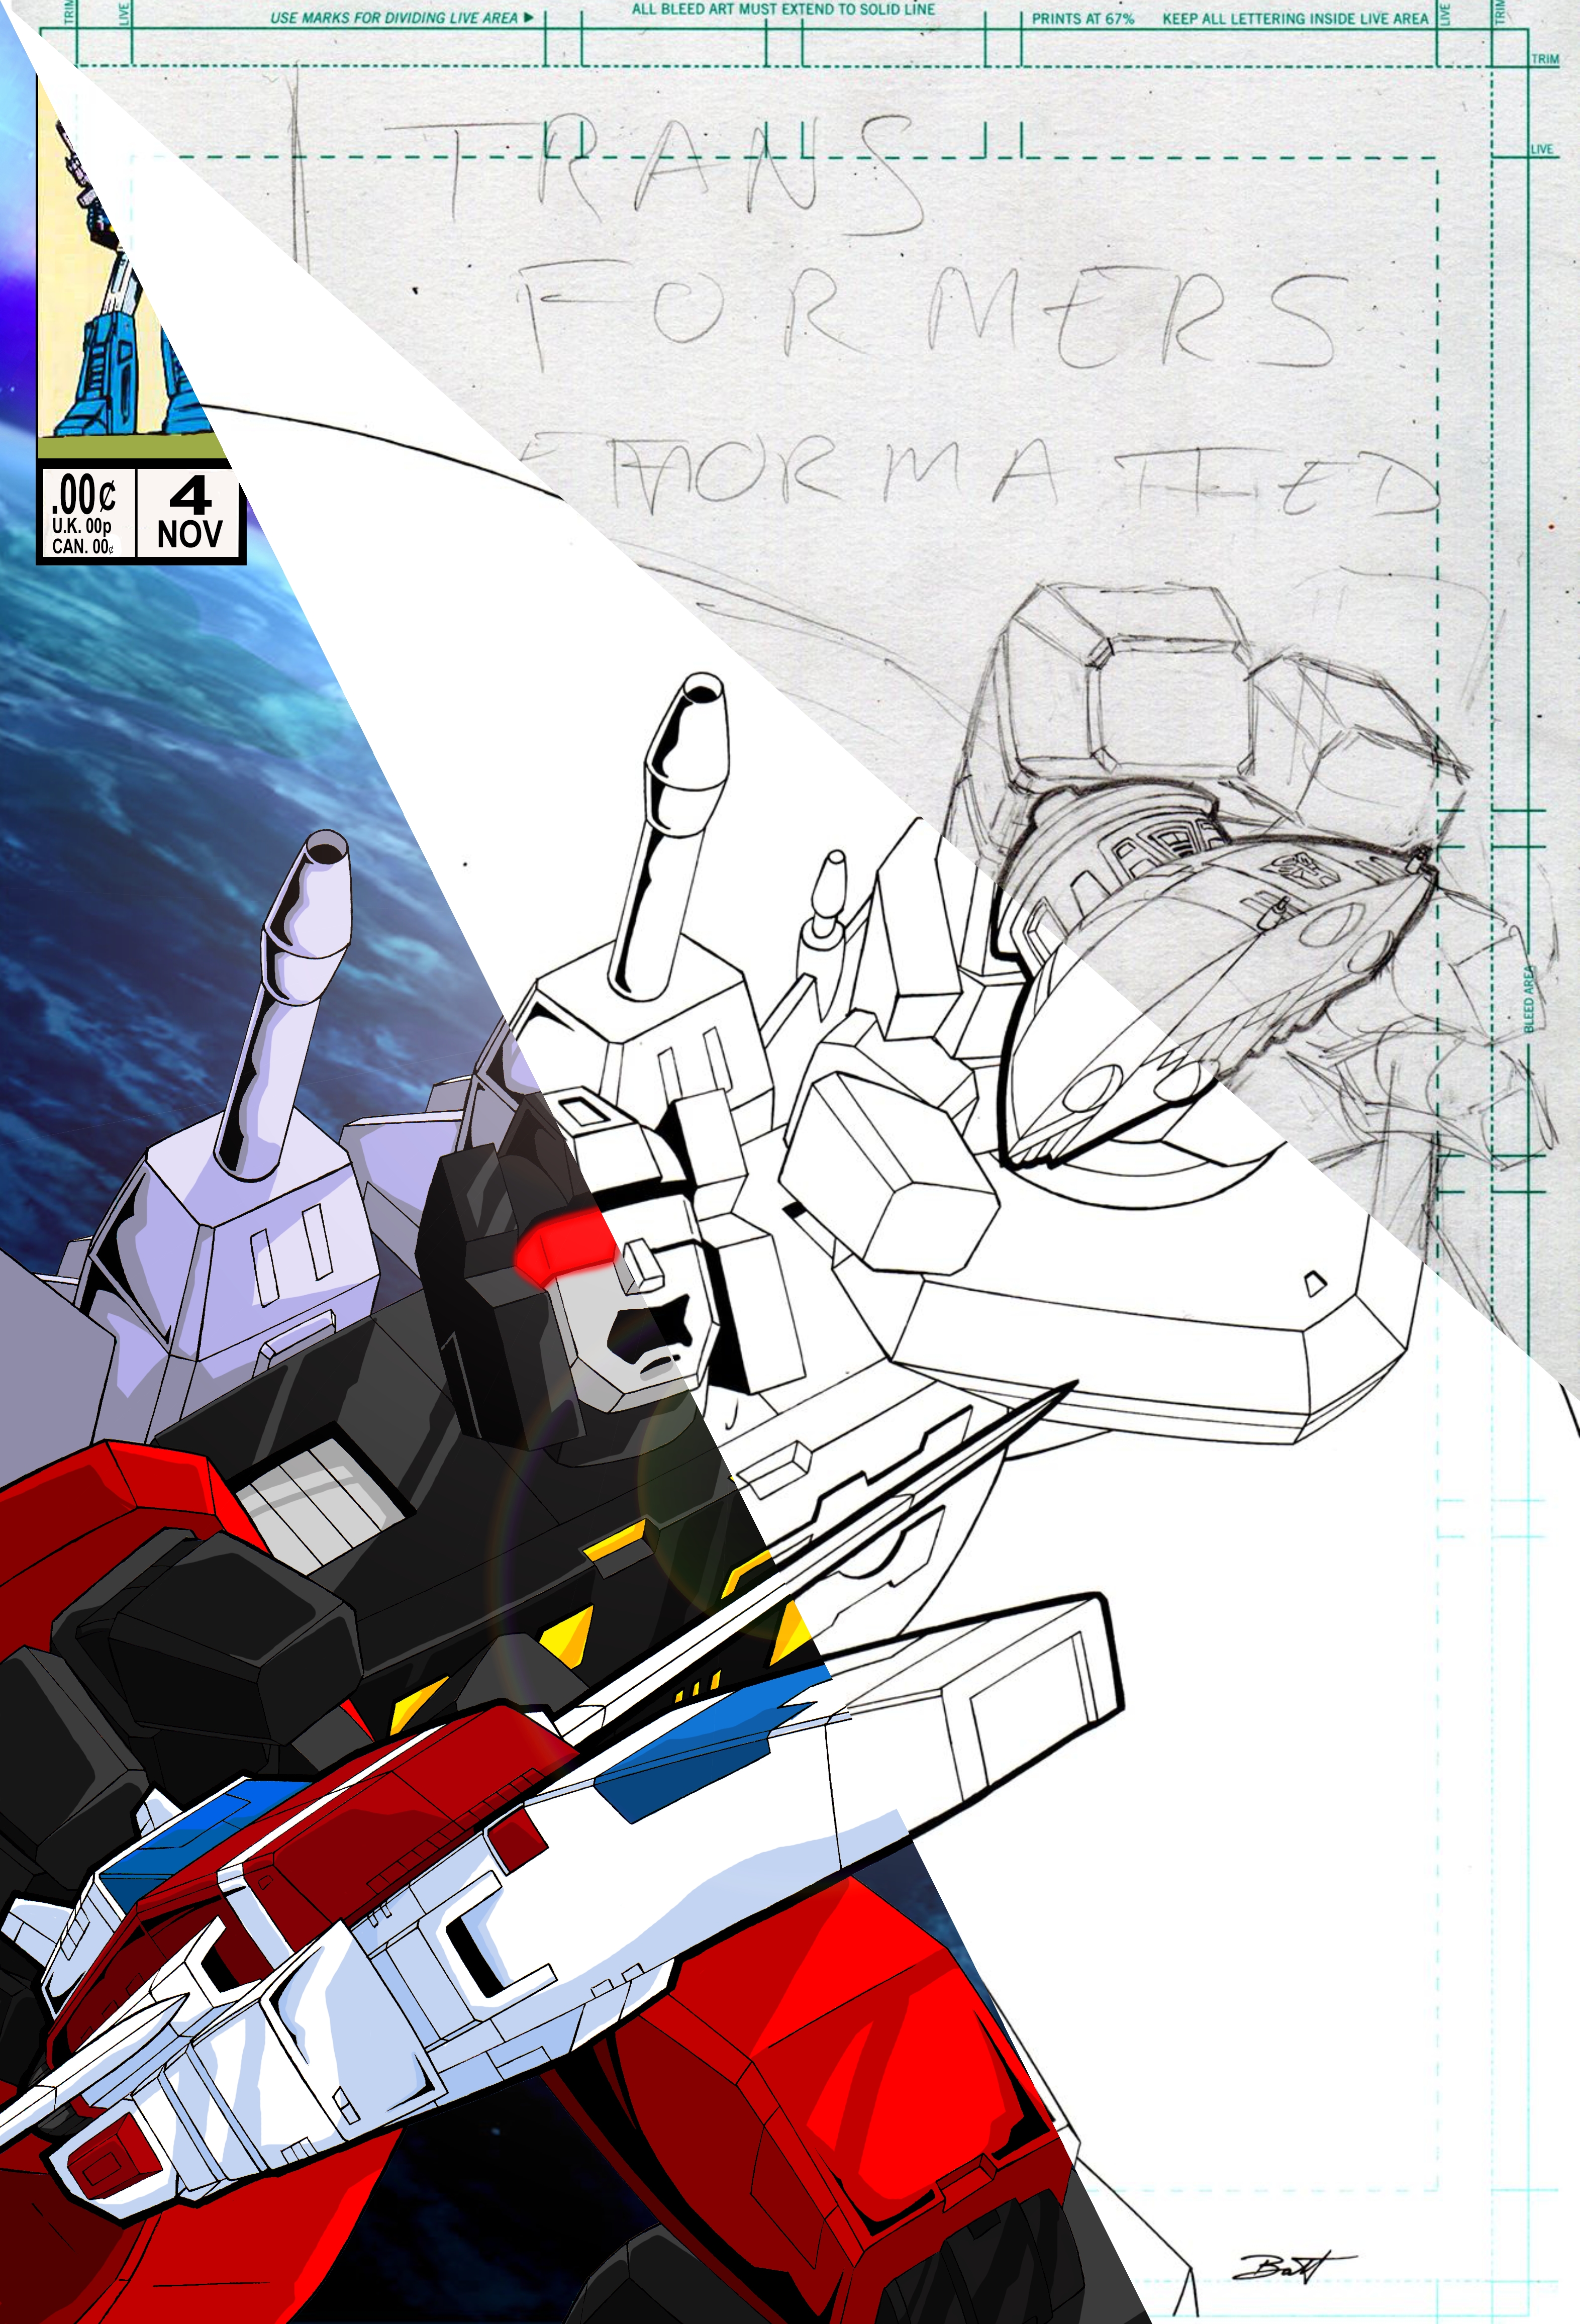 The Art Of Transformers: REANIMATED Issue 4